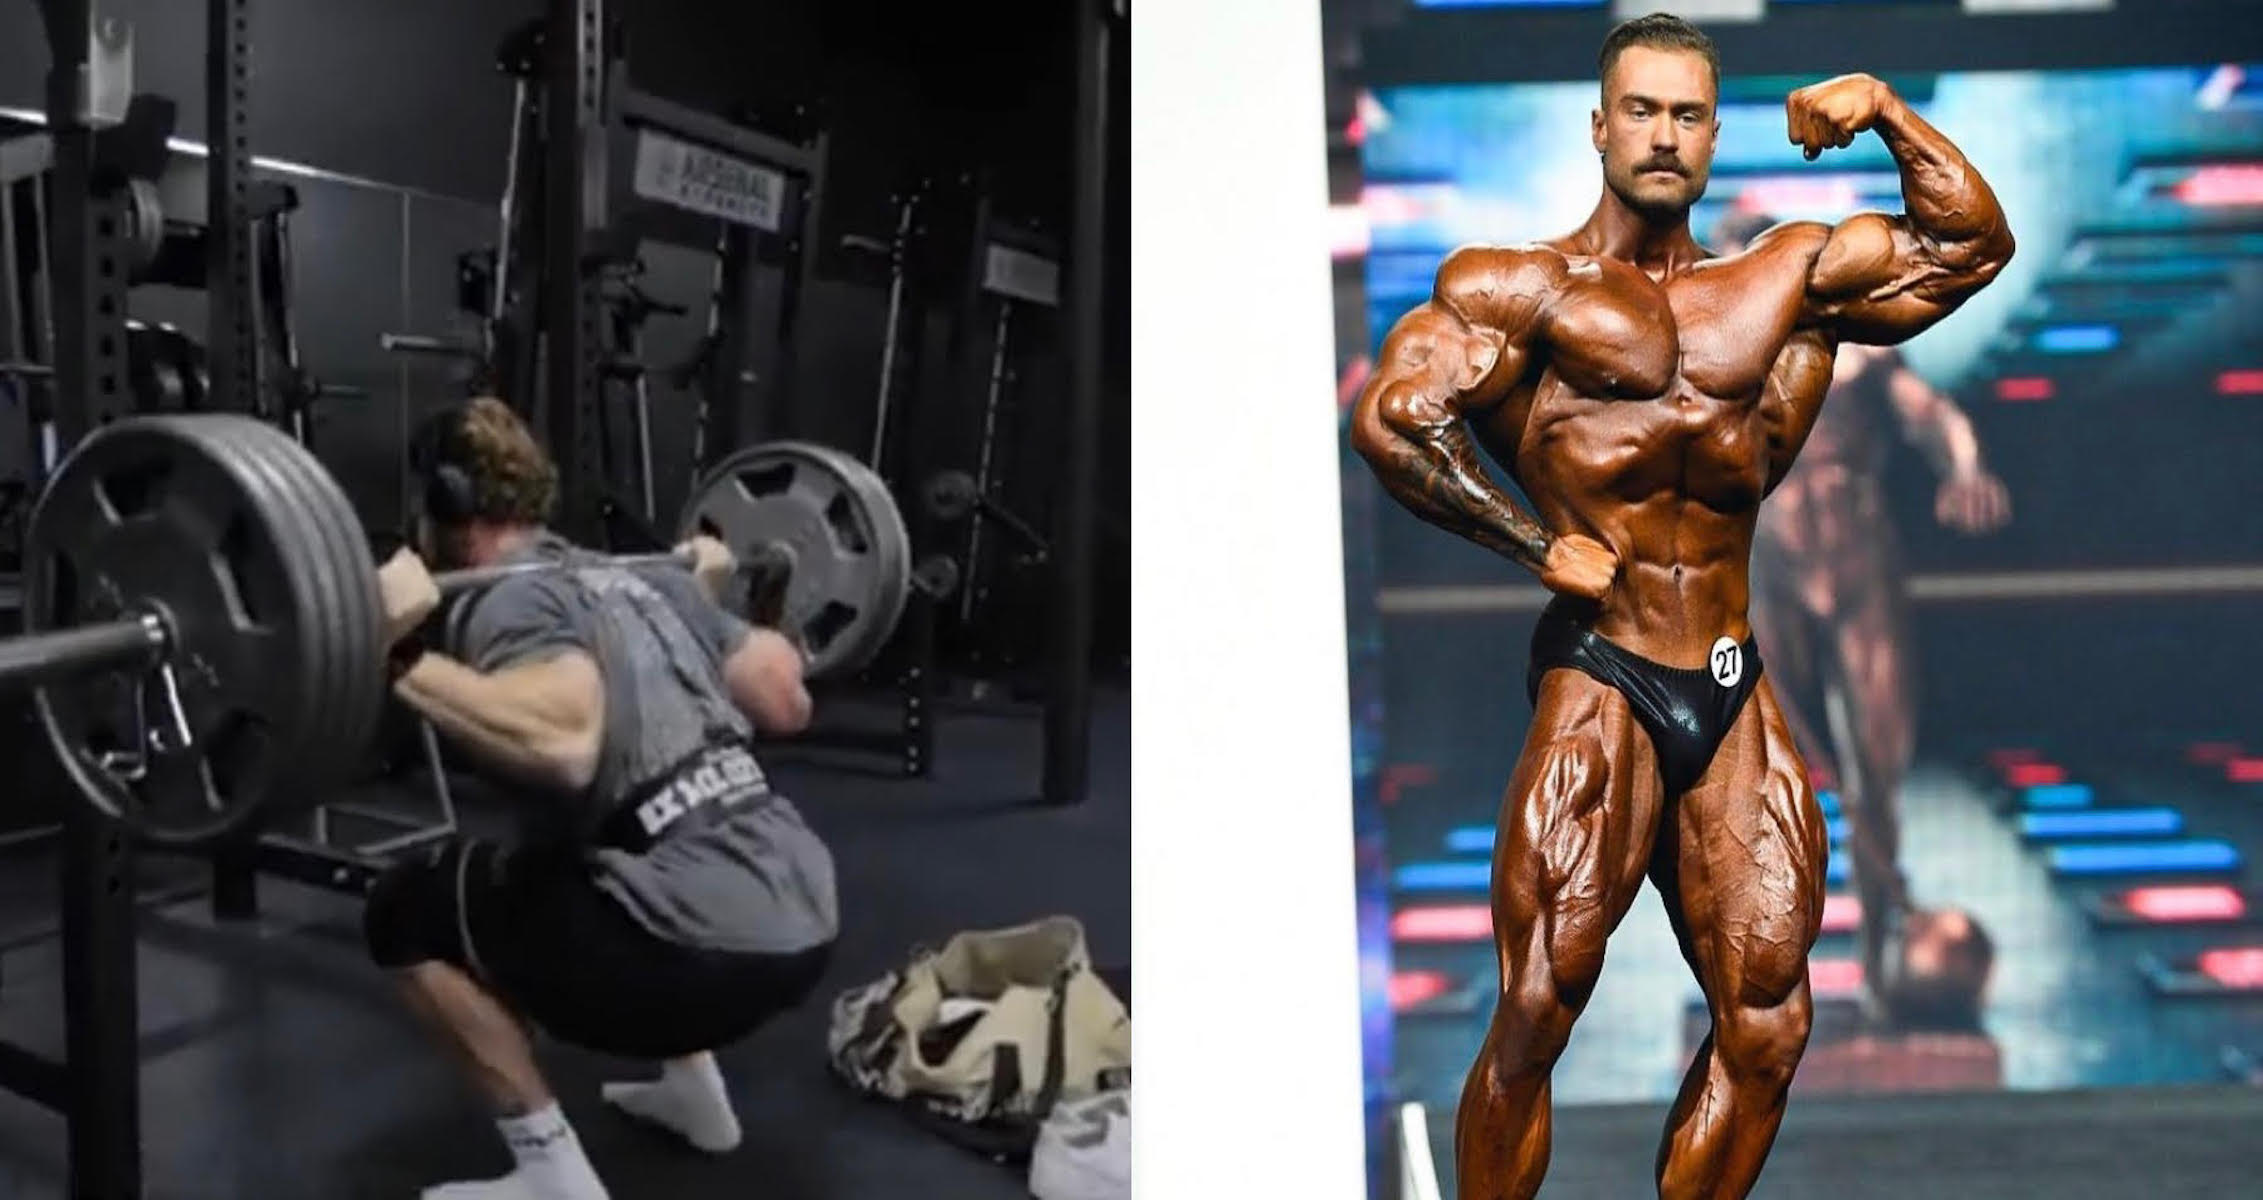 Chris Bumstead Continues Progress With Massive Leg Day Workout